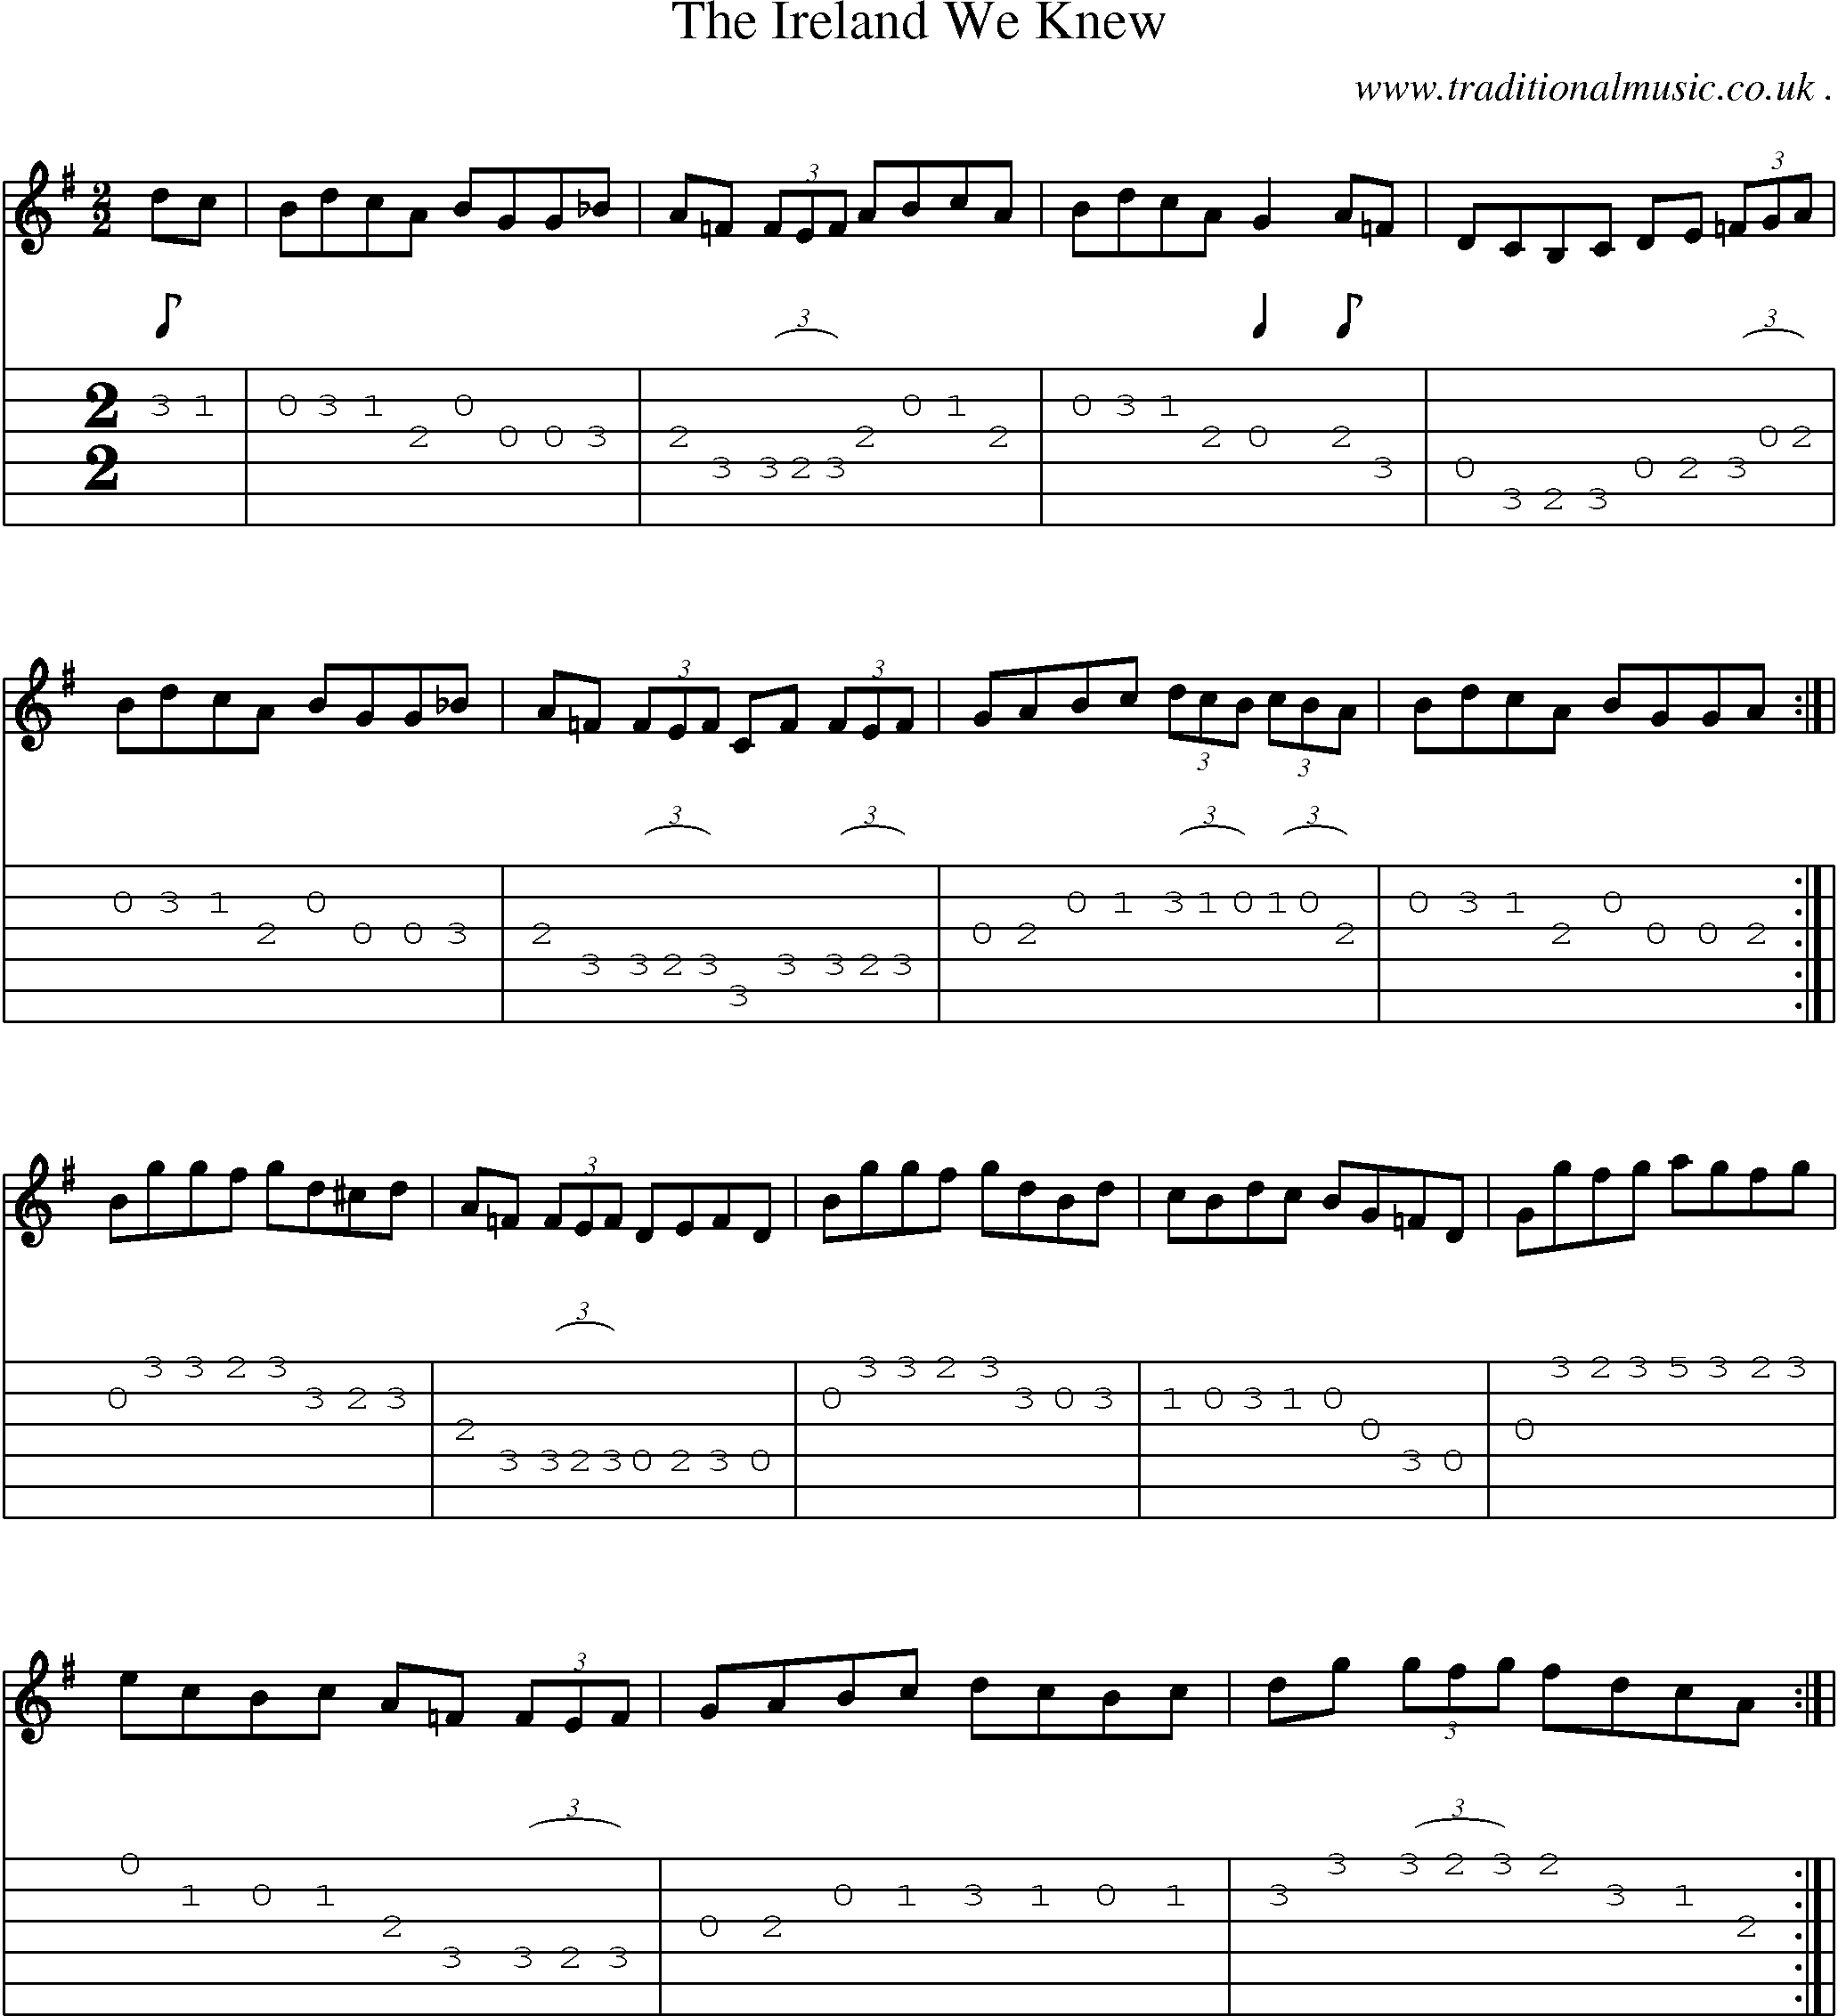 Sheet-Music and Guitar Tabs for The Ireland We Knew